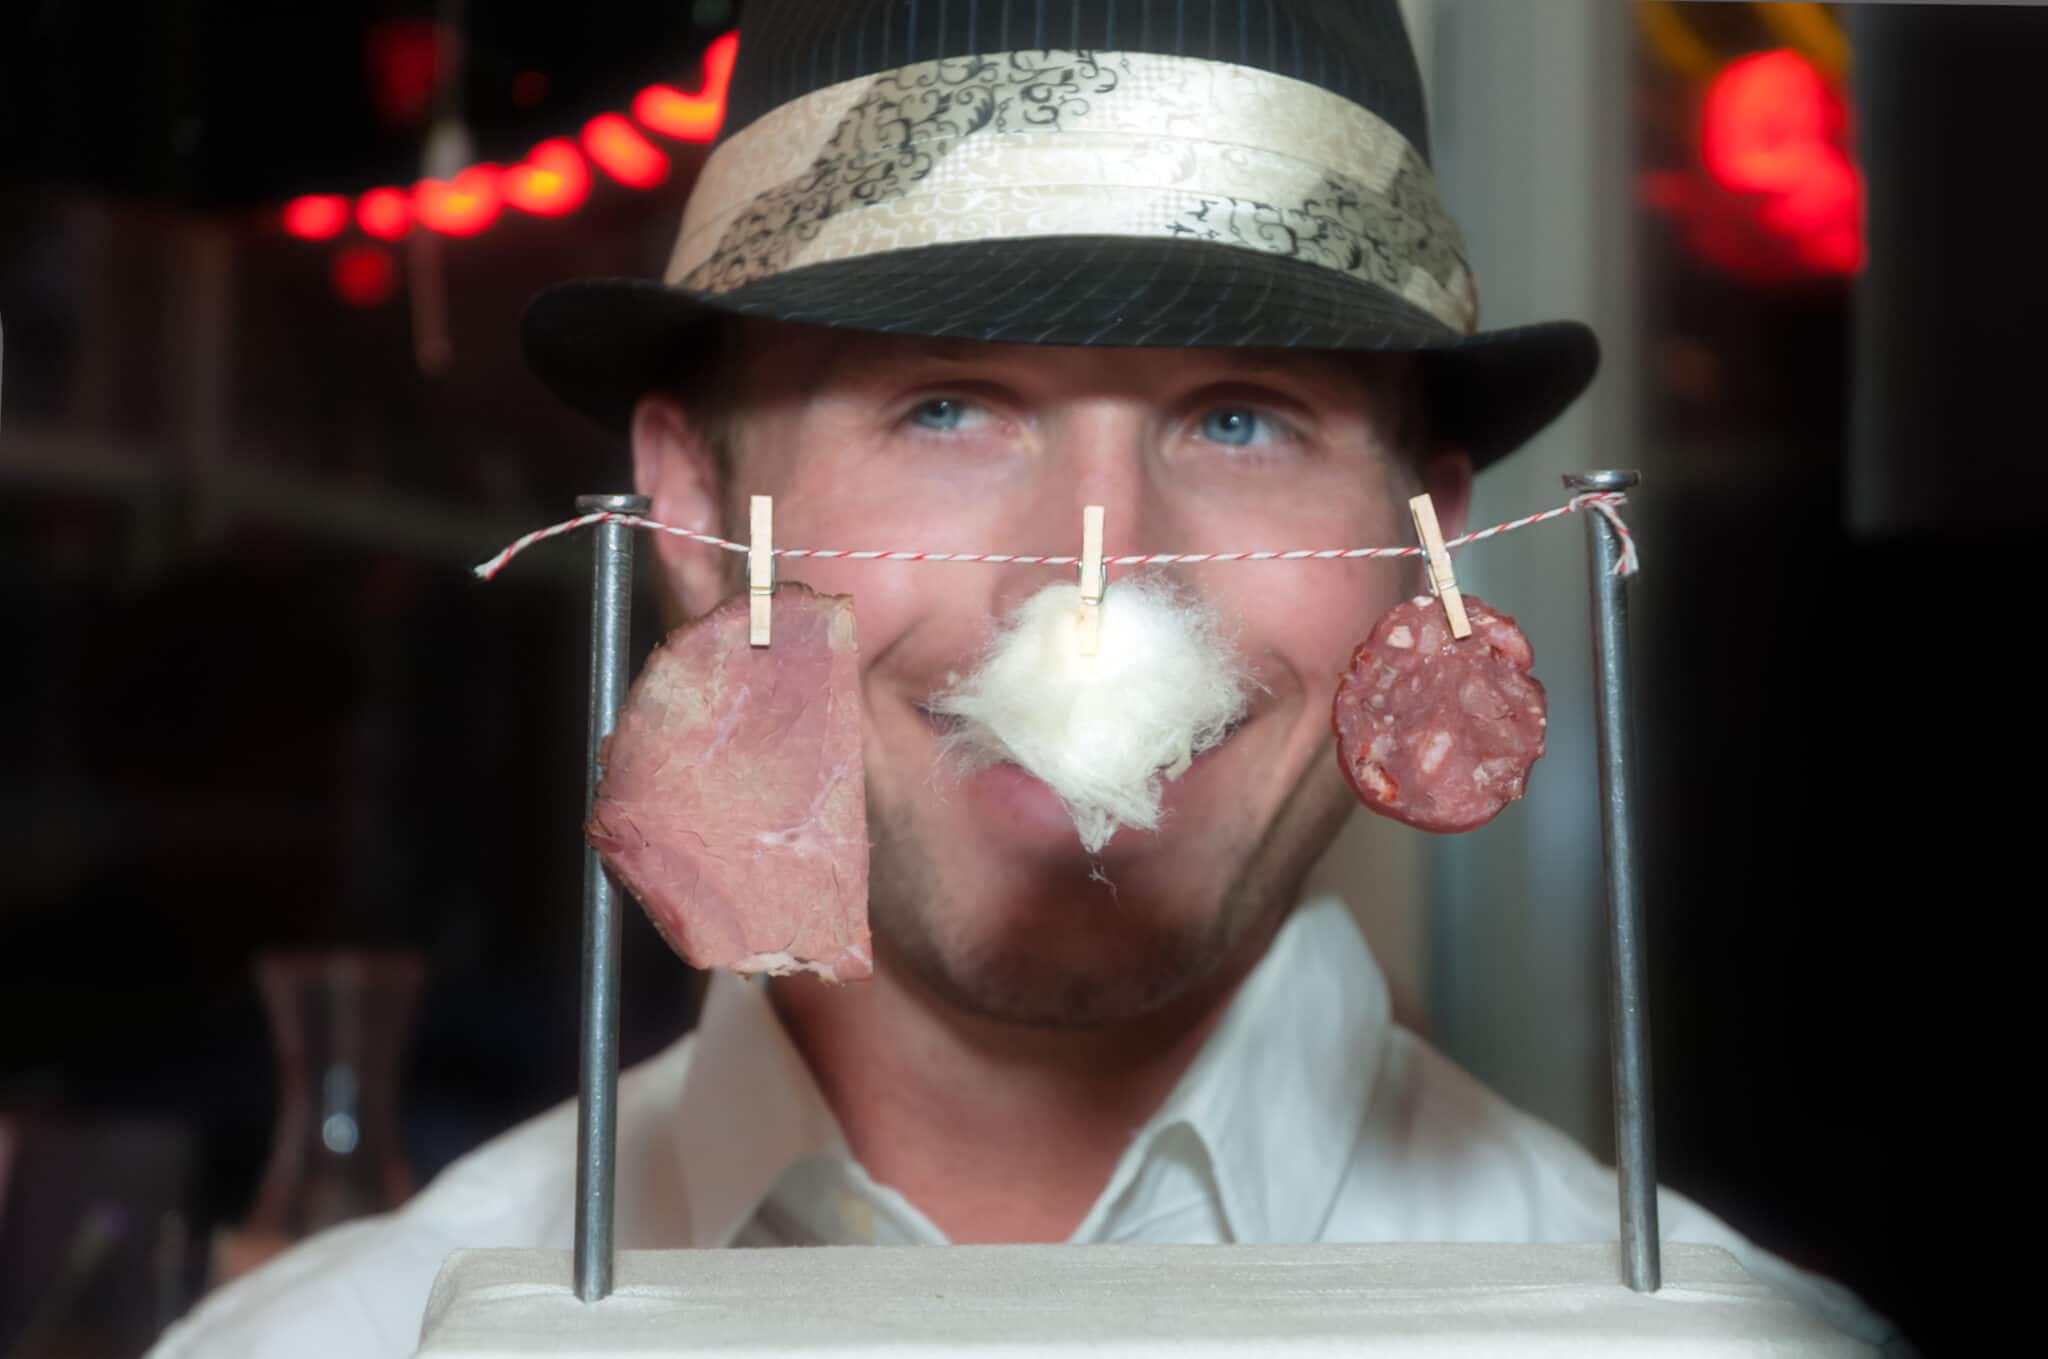 A man wearing a brimmed dress hat playfully places his face behind a clothesline of charcuterie at a pop up restaurant event held by Chef Katie Weinner.